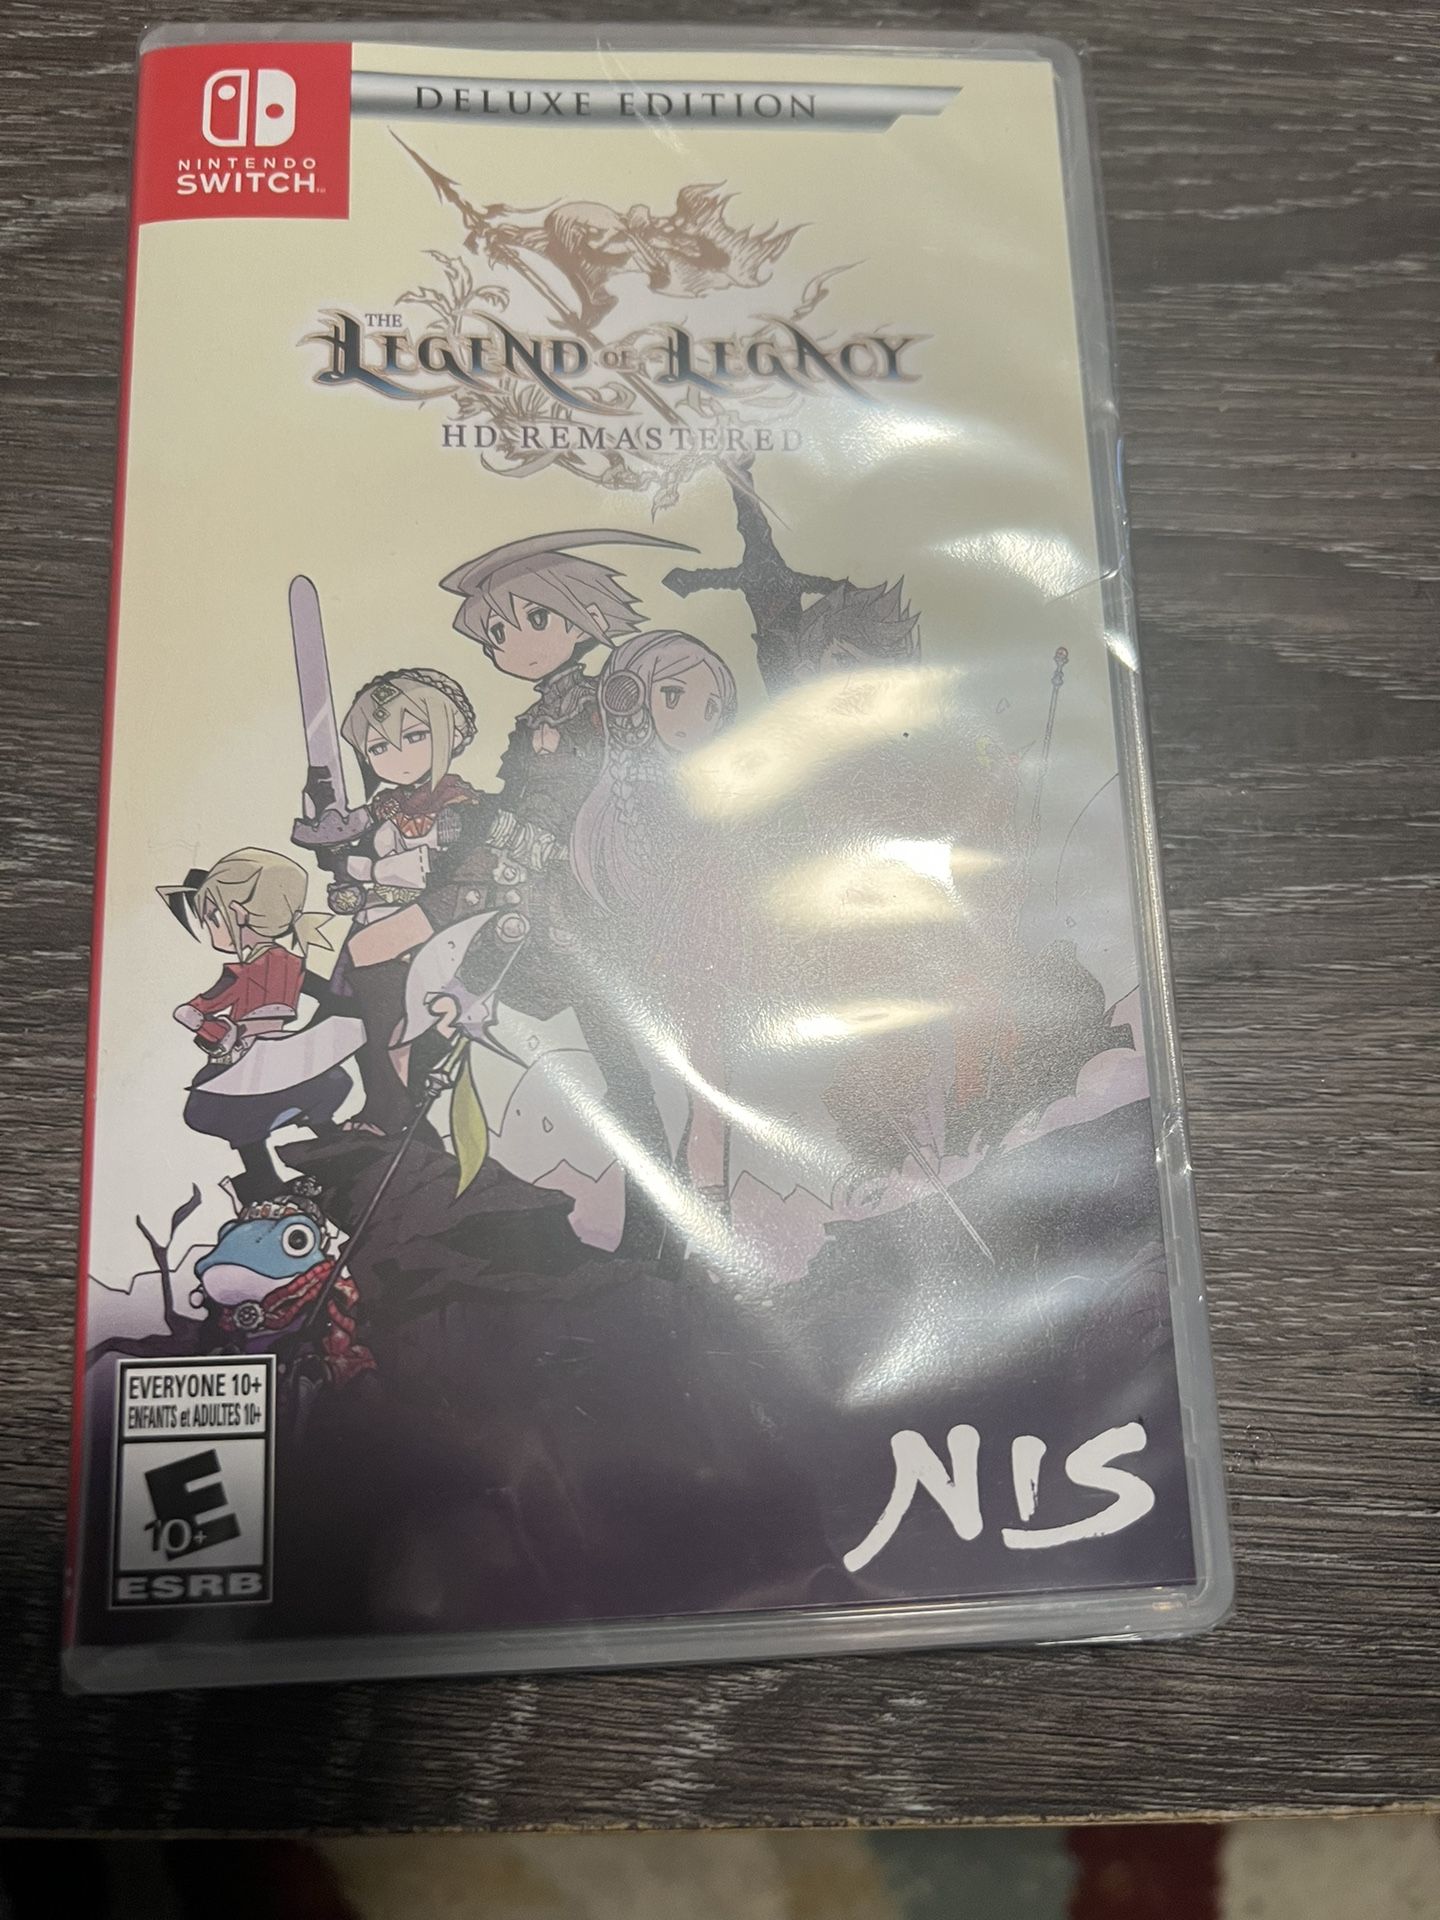 Legends of Legacy HD Remastered-Nintendo Switch-Brand New Sealed!